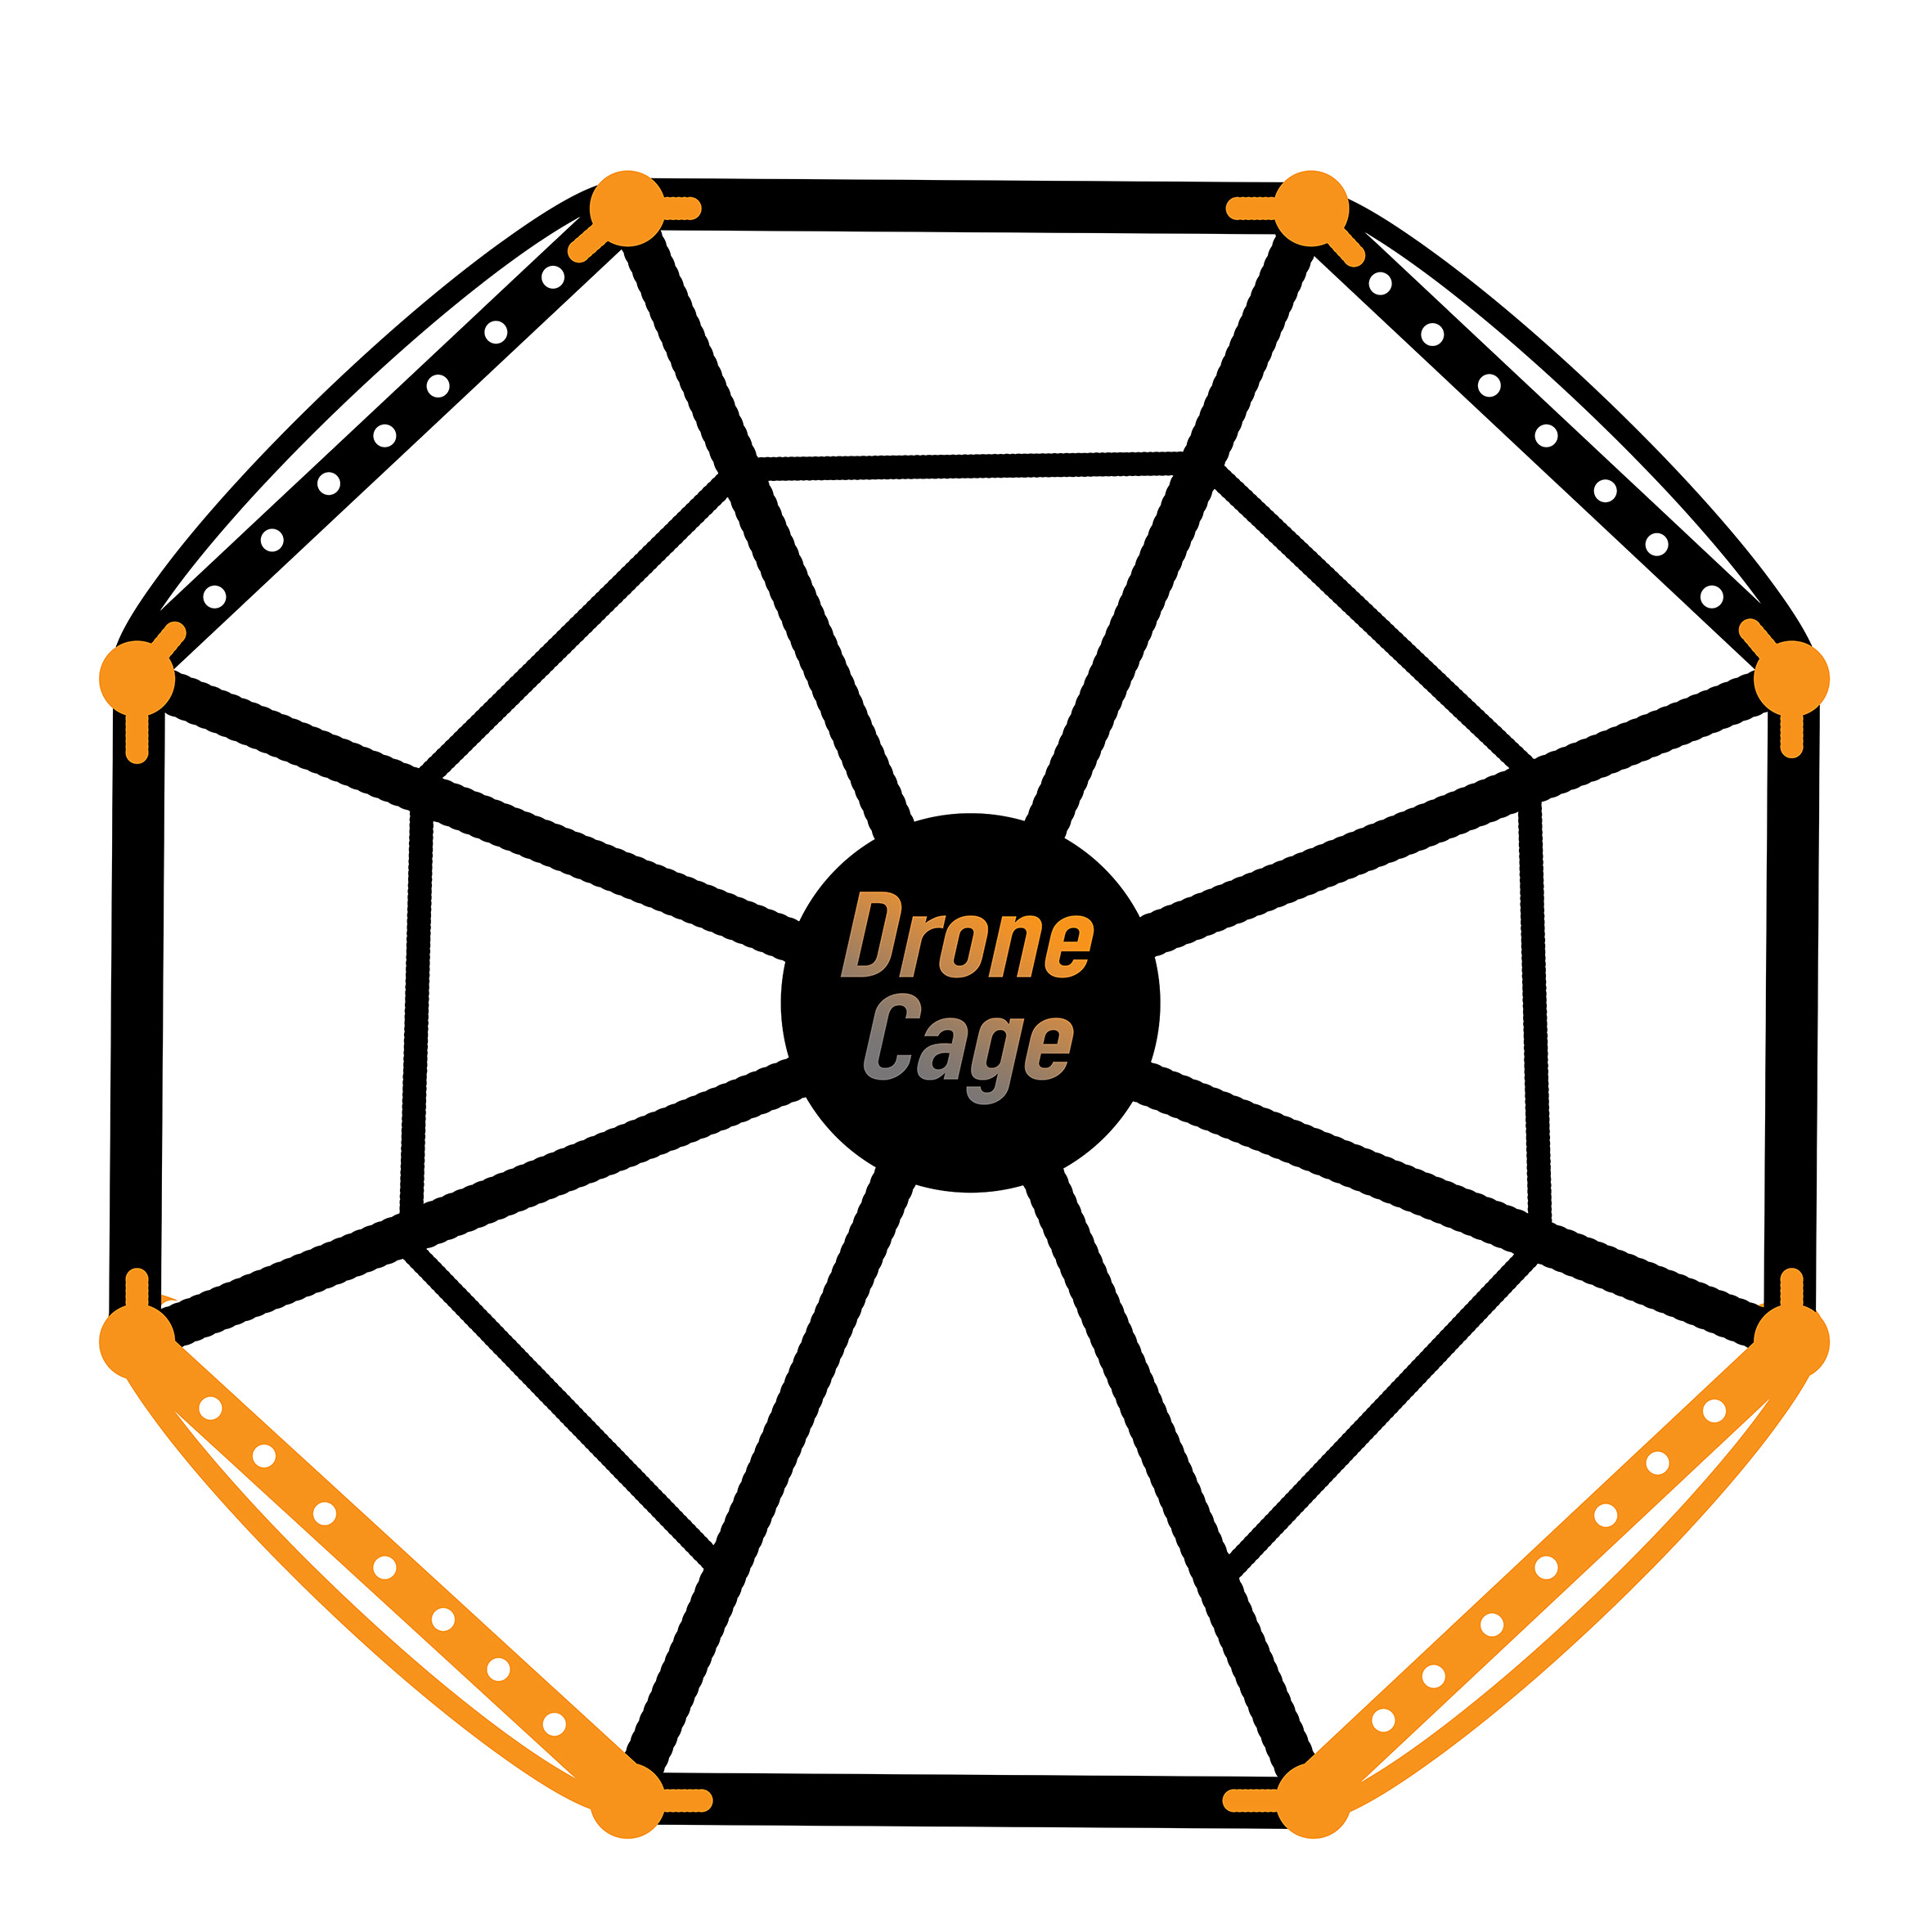 Drone Cage. Rugged. Reliable. Ready to work.